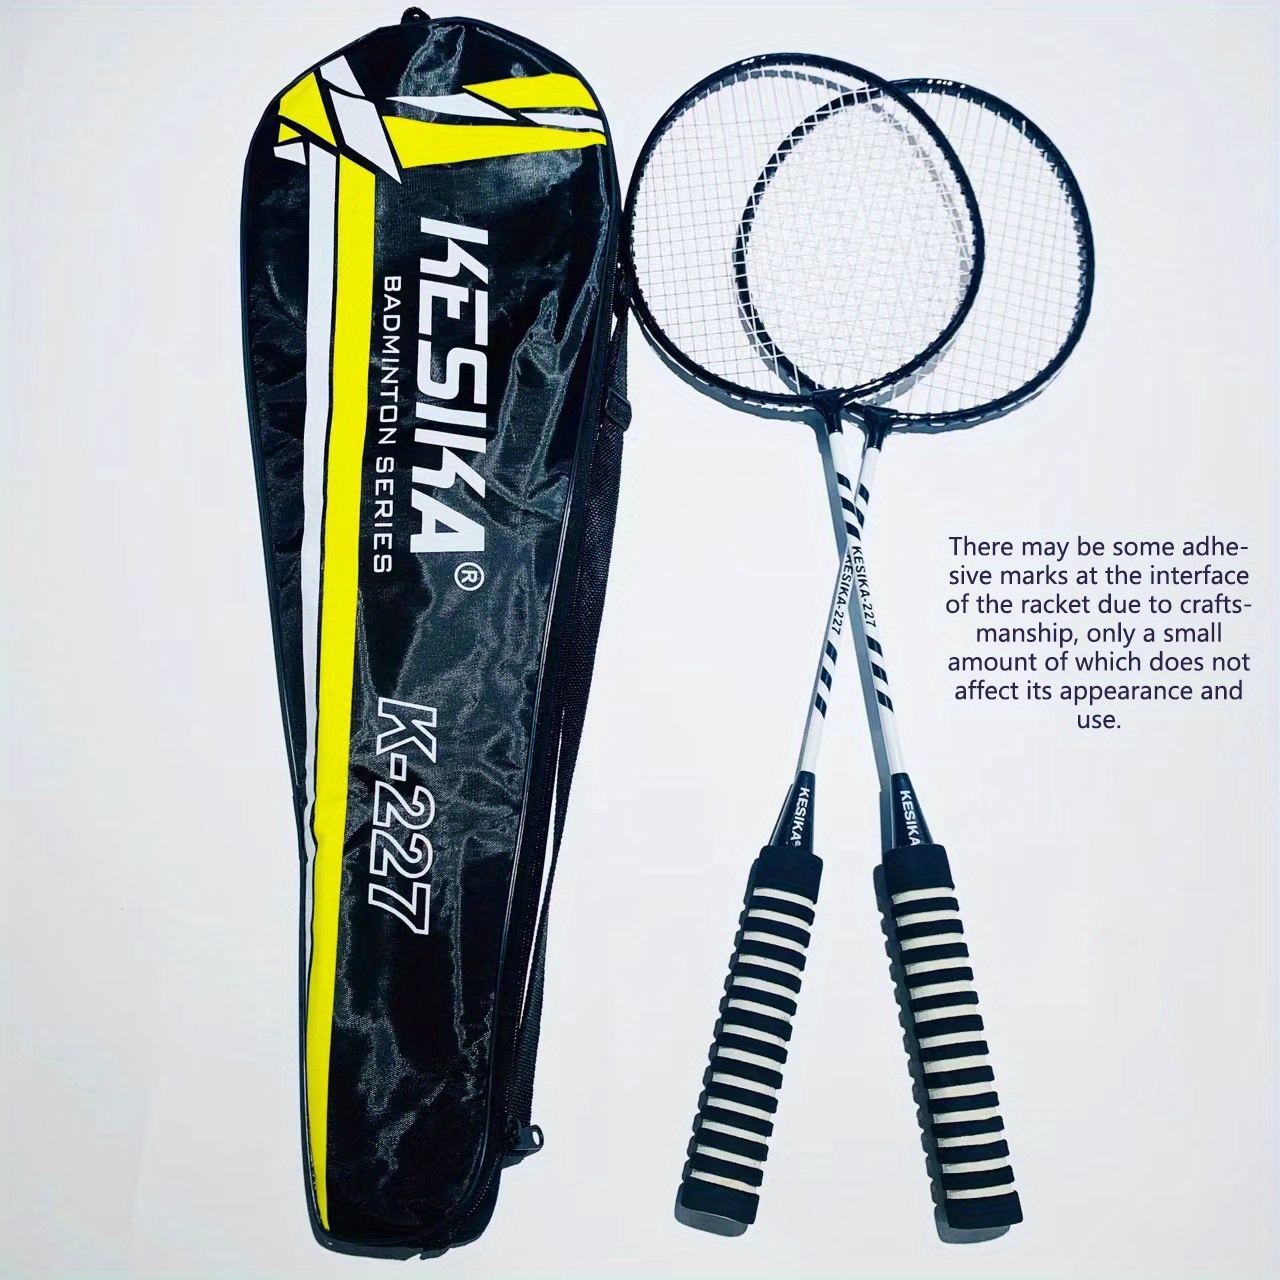 Durable Badminton Racket Set For Youth And Adults - Includes Two Rackets For Training And Recreation